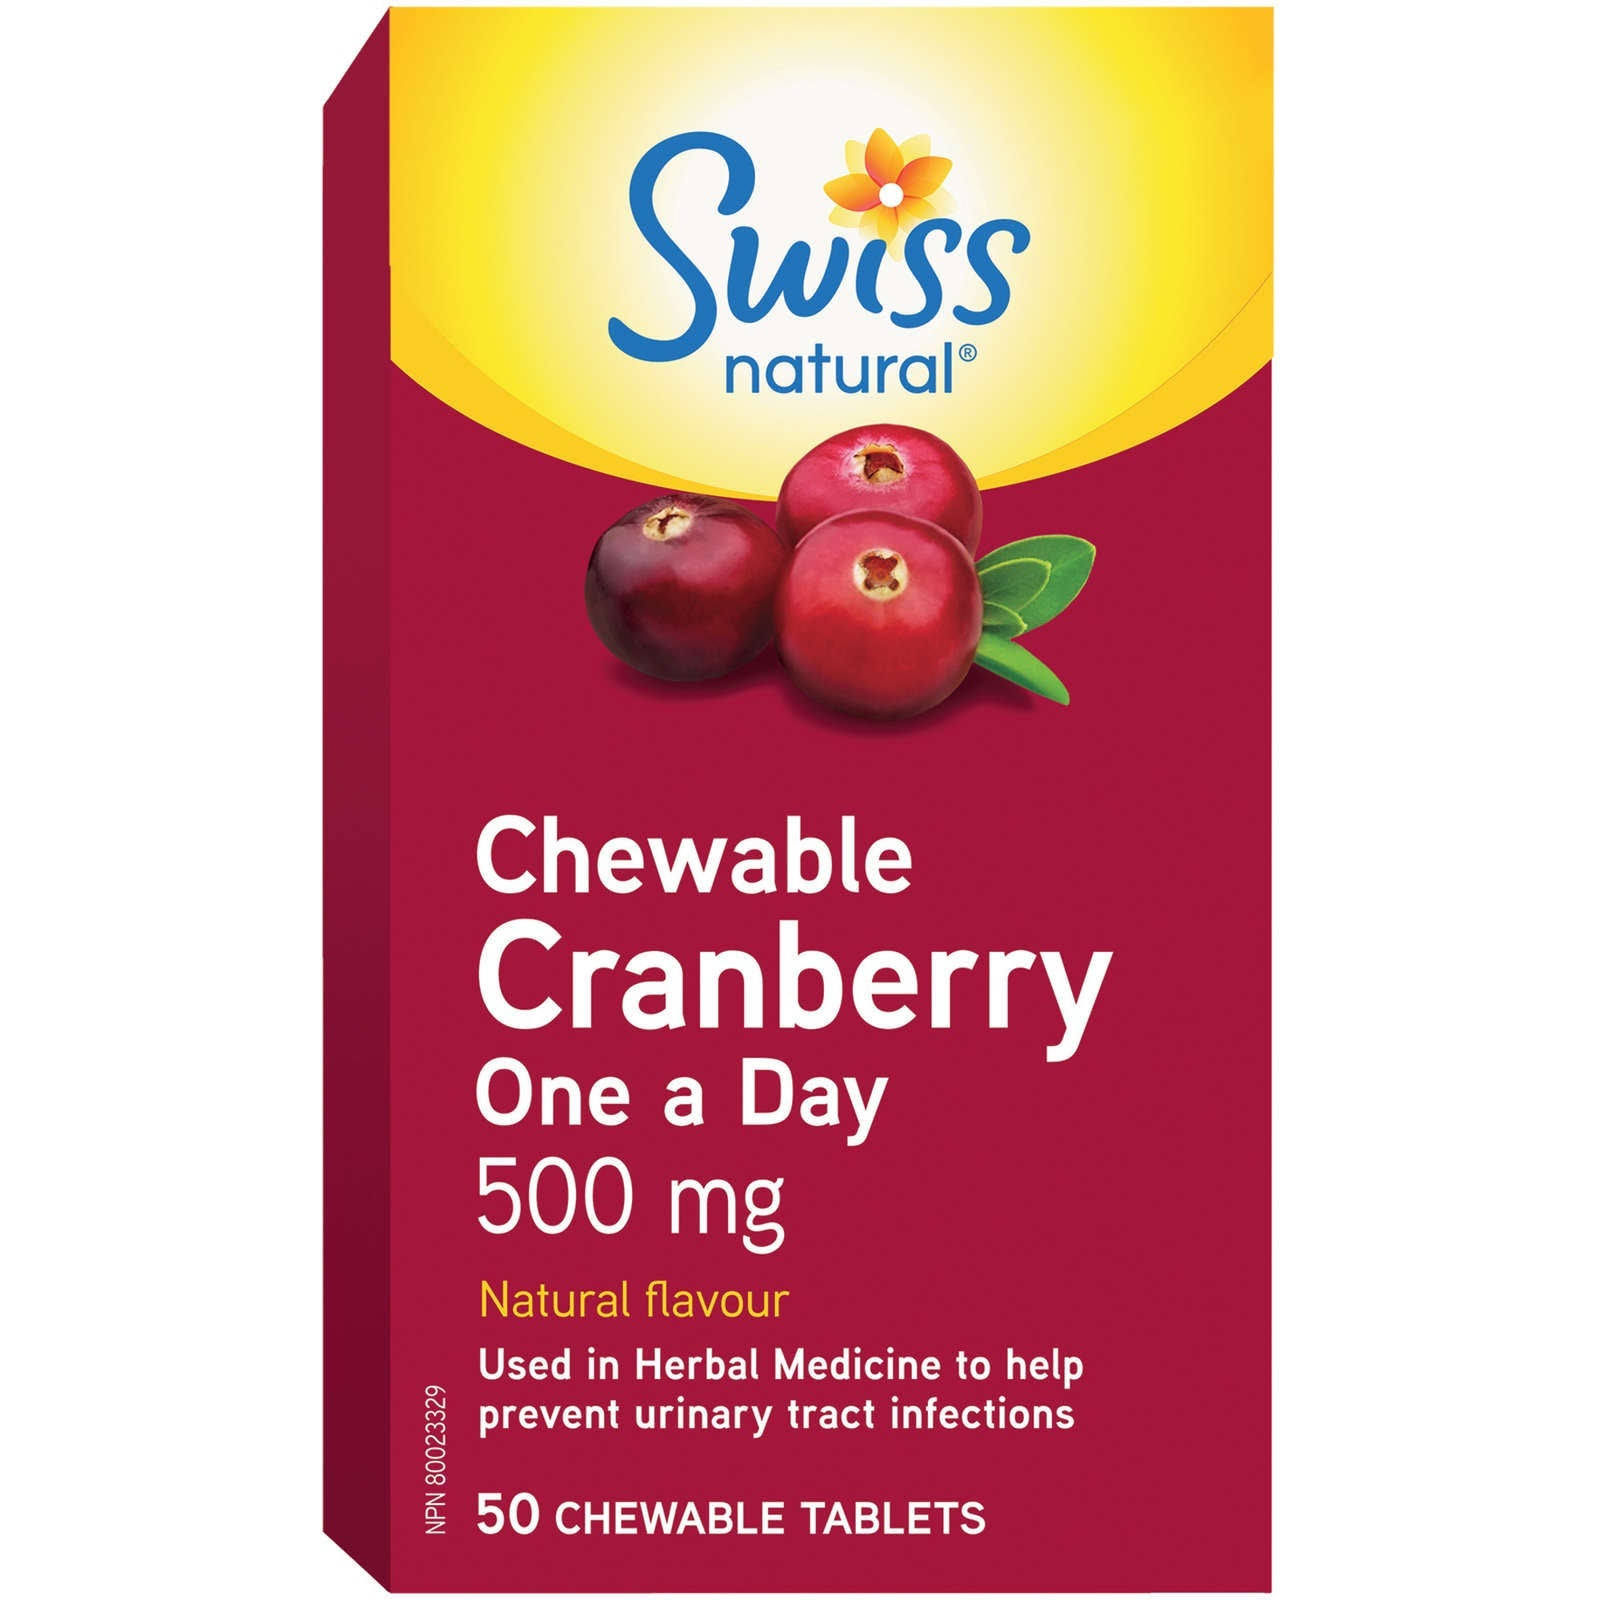 Swiss Naturals Cranberry One A Day Chewable Tablets - 500mg, 50ct